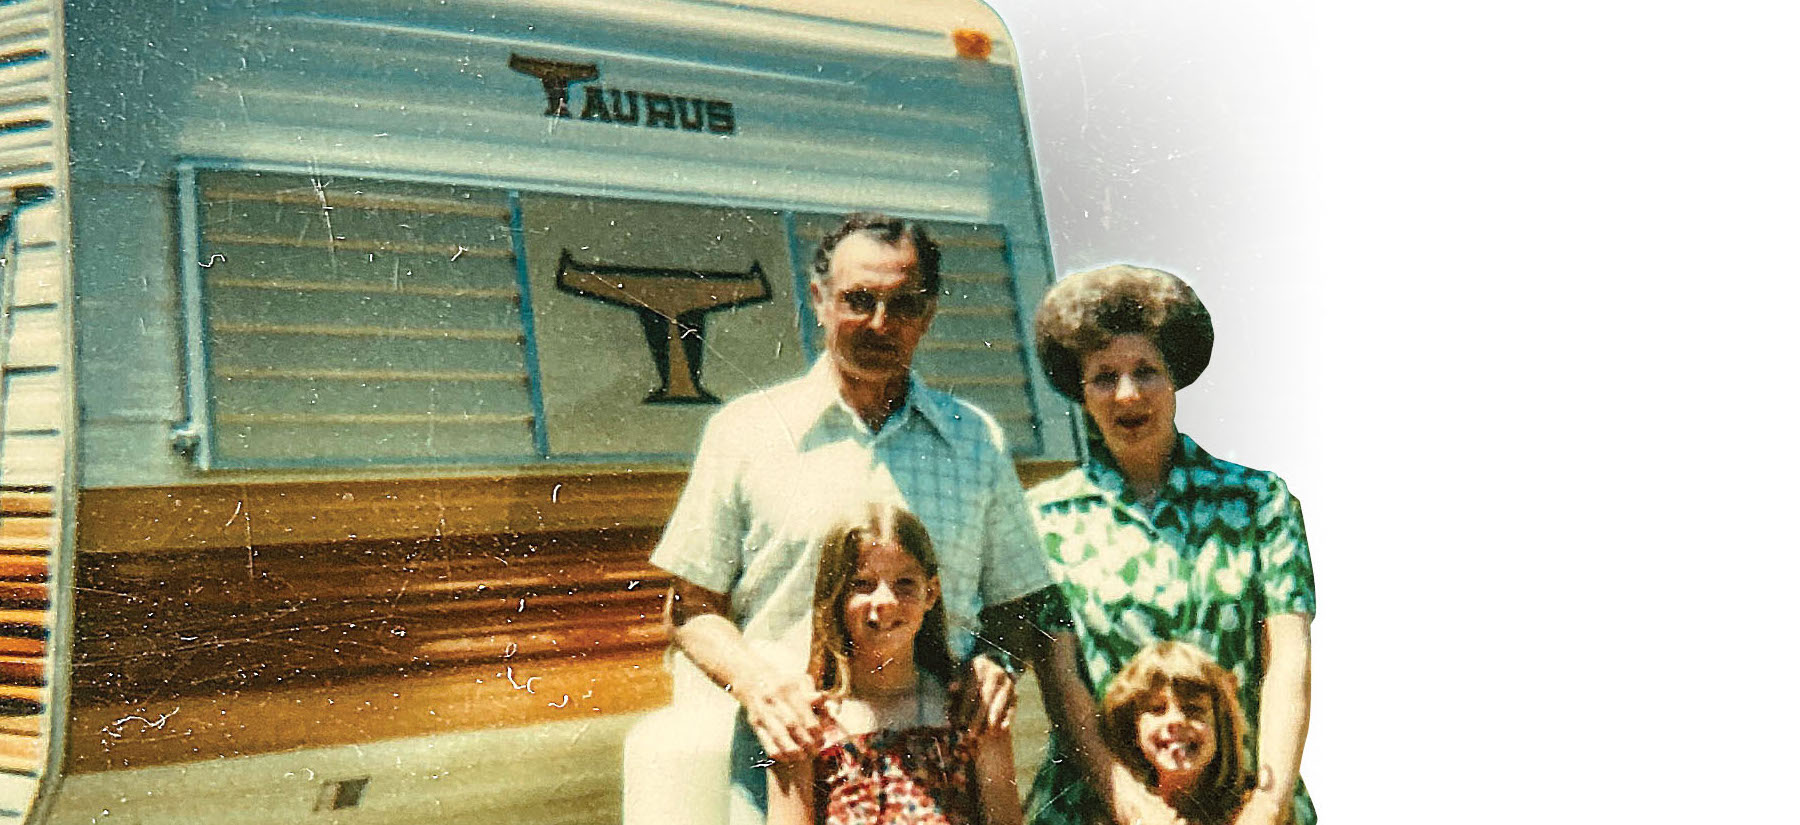 Jeannie & Sister with Grandparents with their Travel Trailer